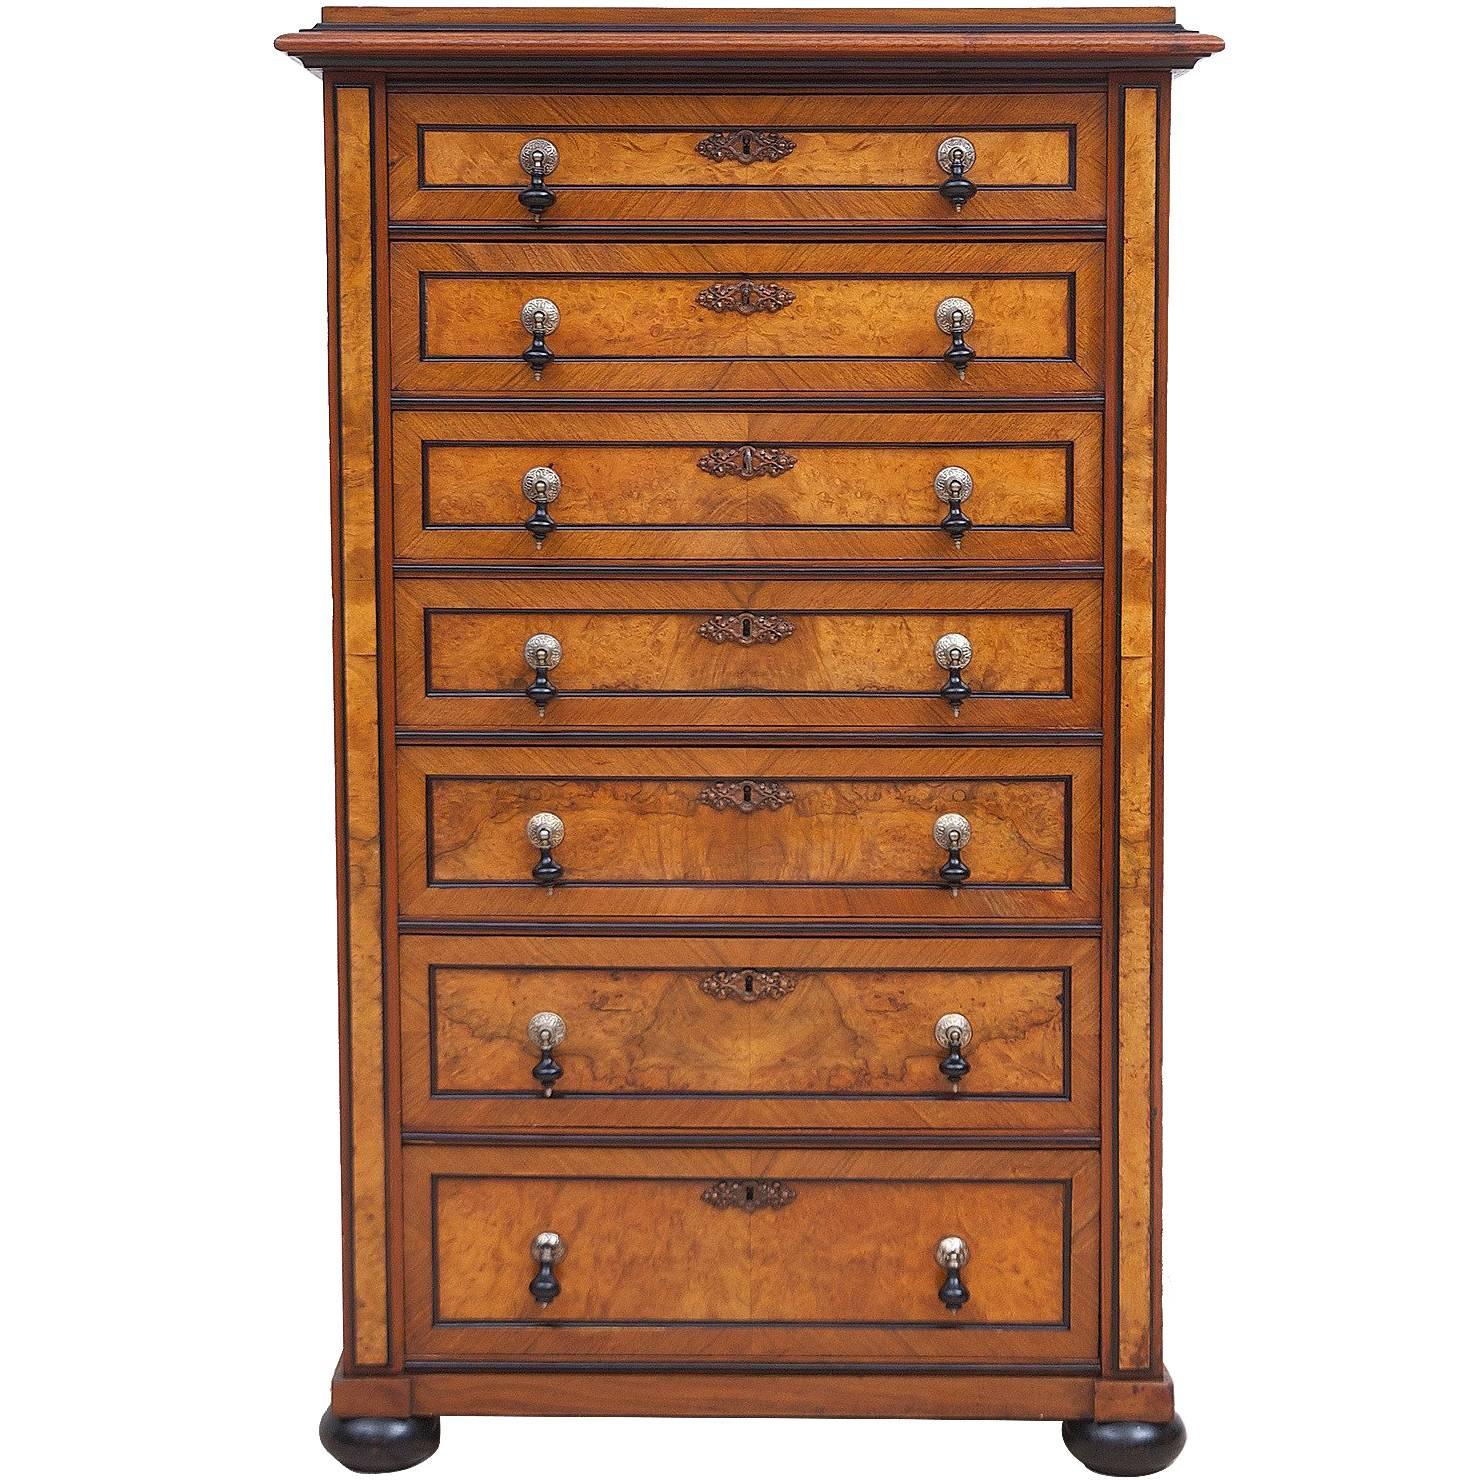 Scandinavian Tall Chest of Drawers in Figured Walnut with Original Hardware